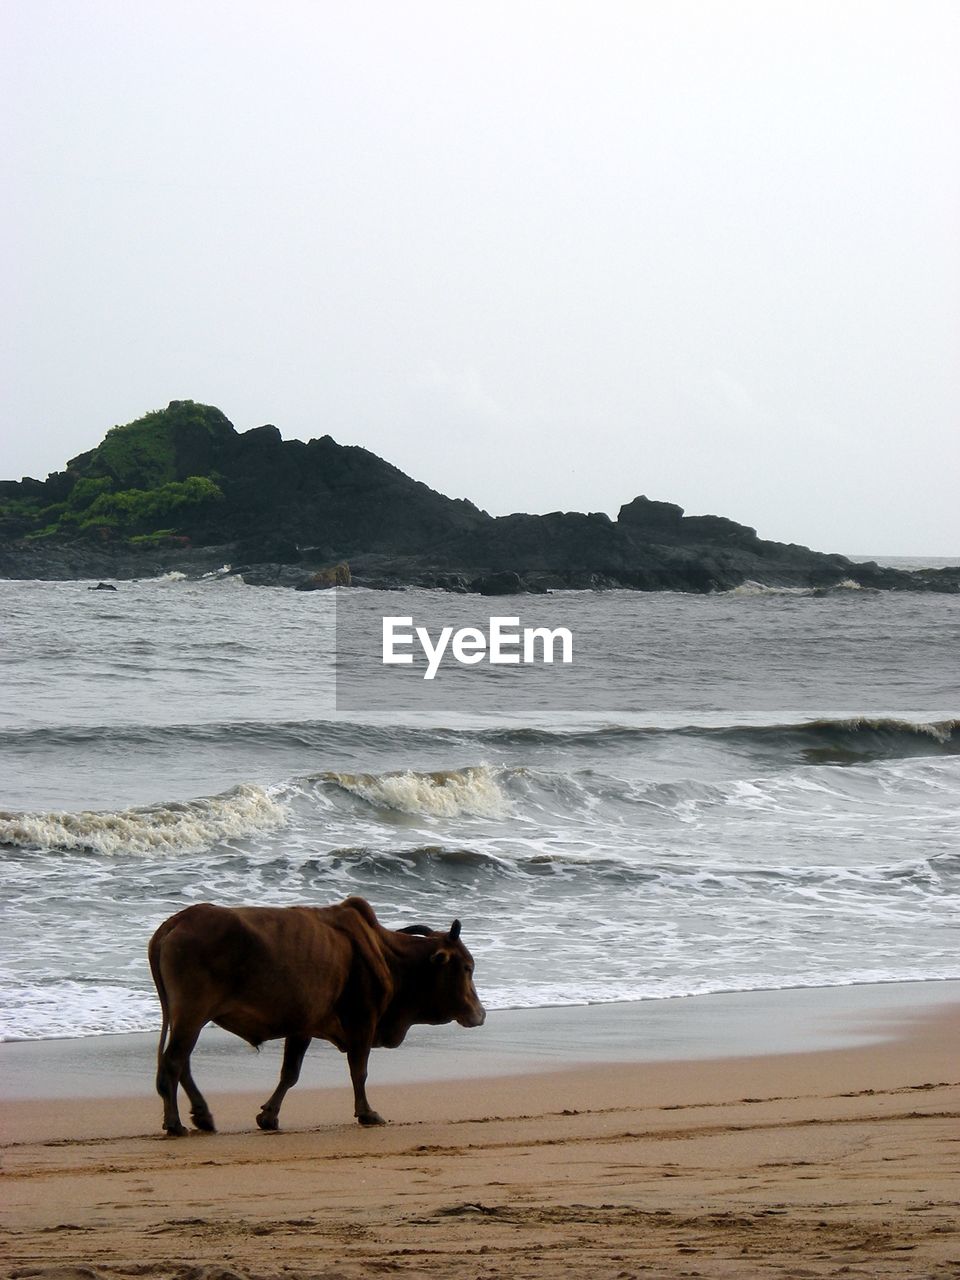 A brown cow at a sandy beach in india.